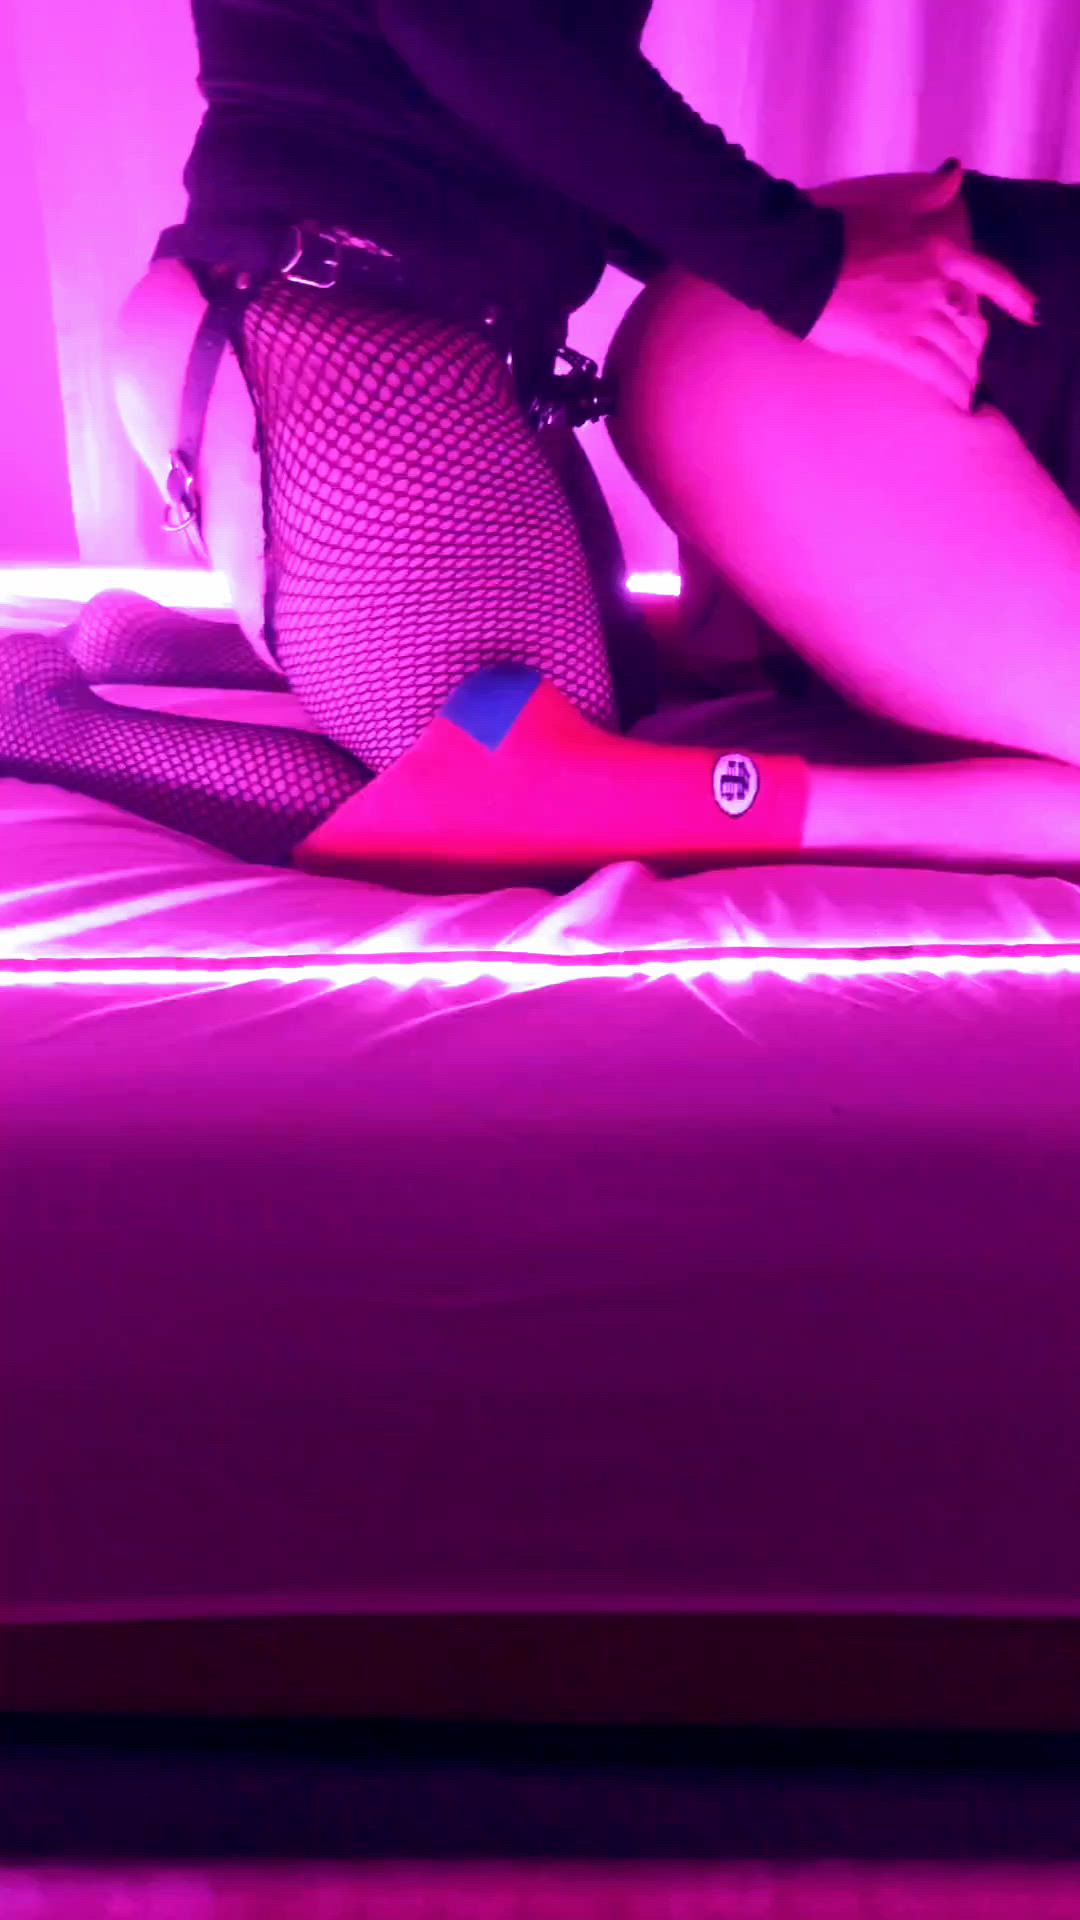 Amateur porn video with onlyfans model florybenja420 <strong>@florybenja420</strong>